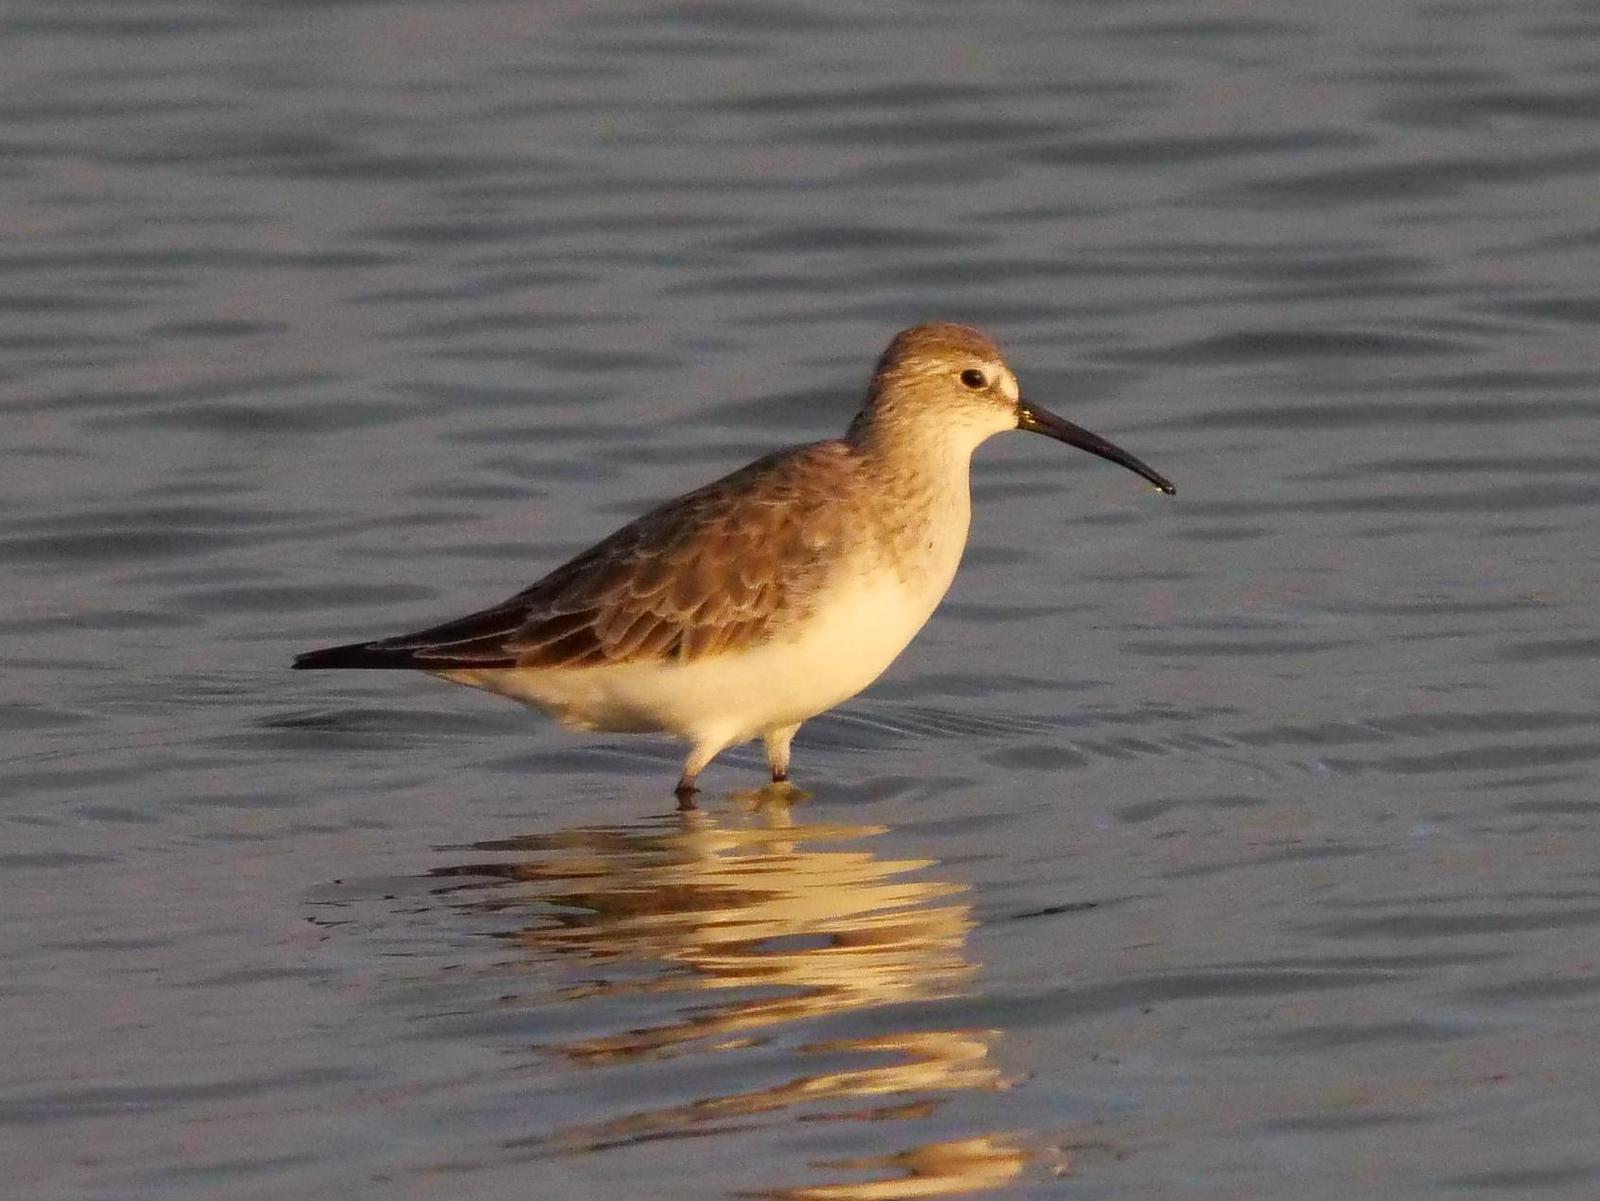 Curlew Sandpiper Photo by Peter Lowe